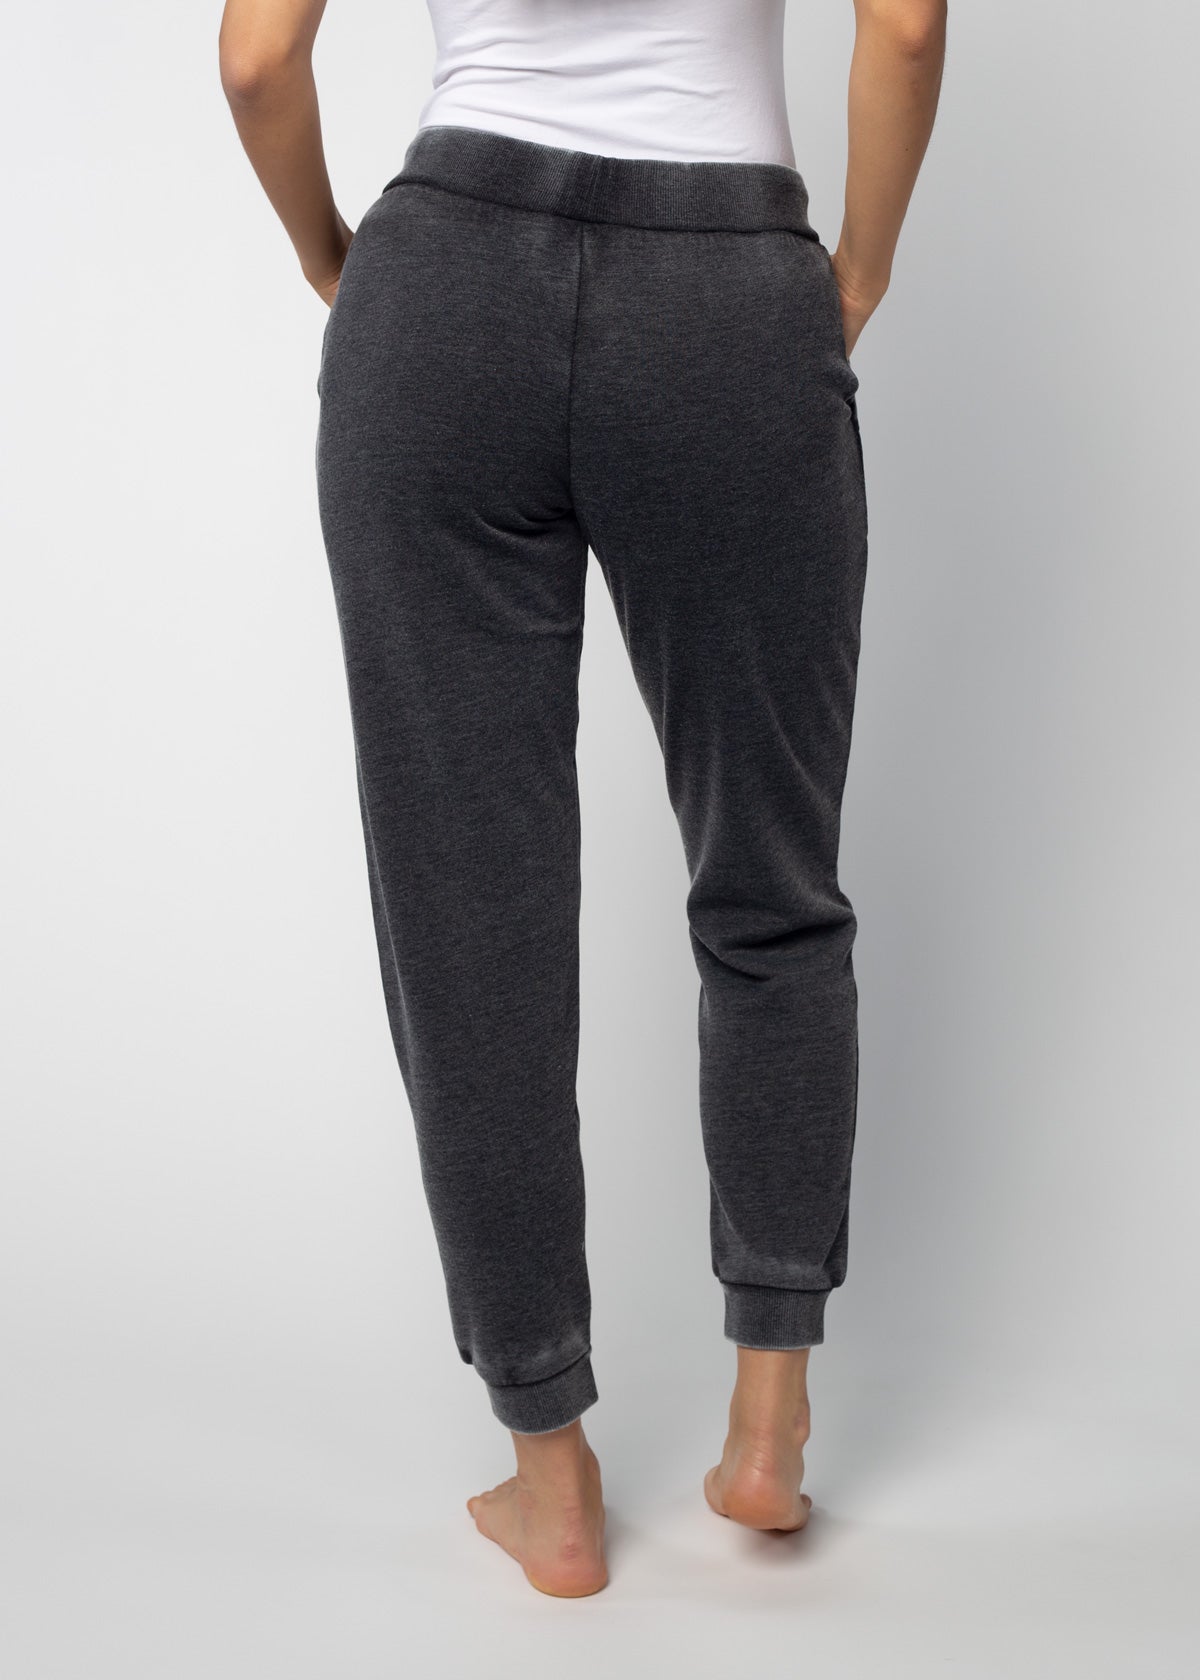 West Virginia Mountaineers Charcoal Campus Sweatpants